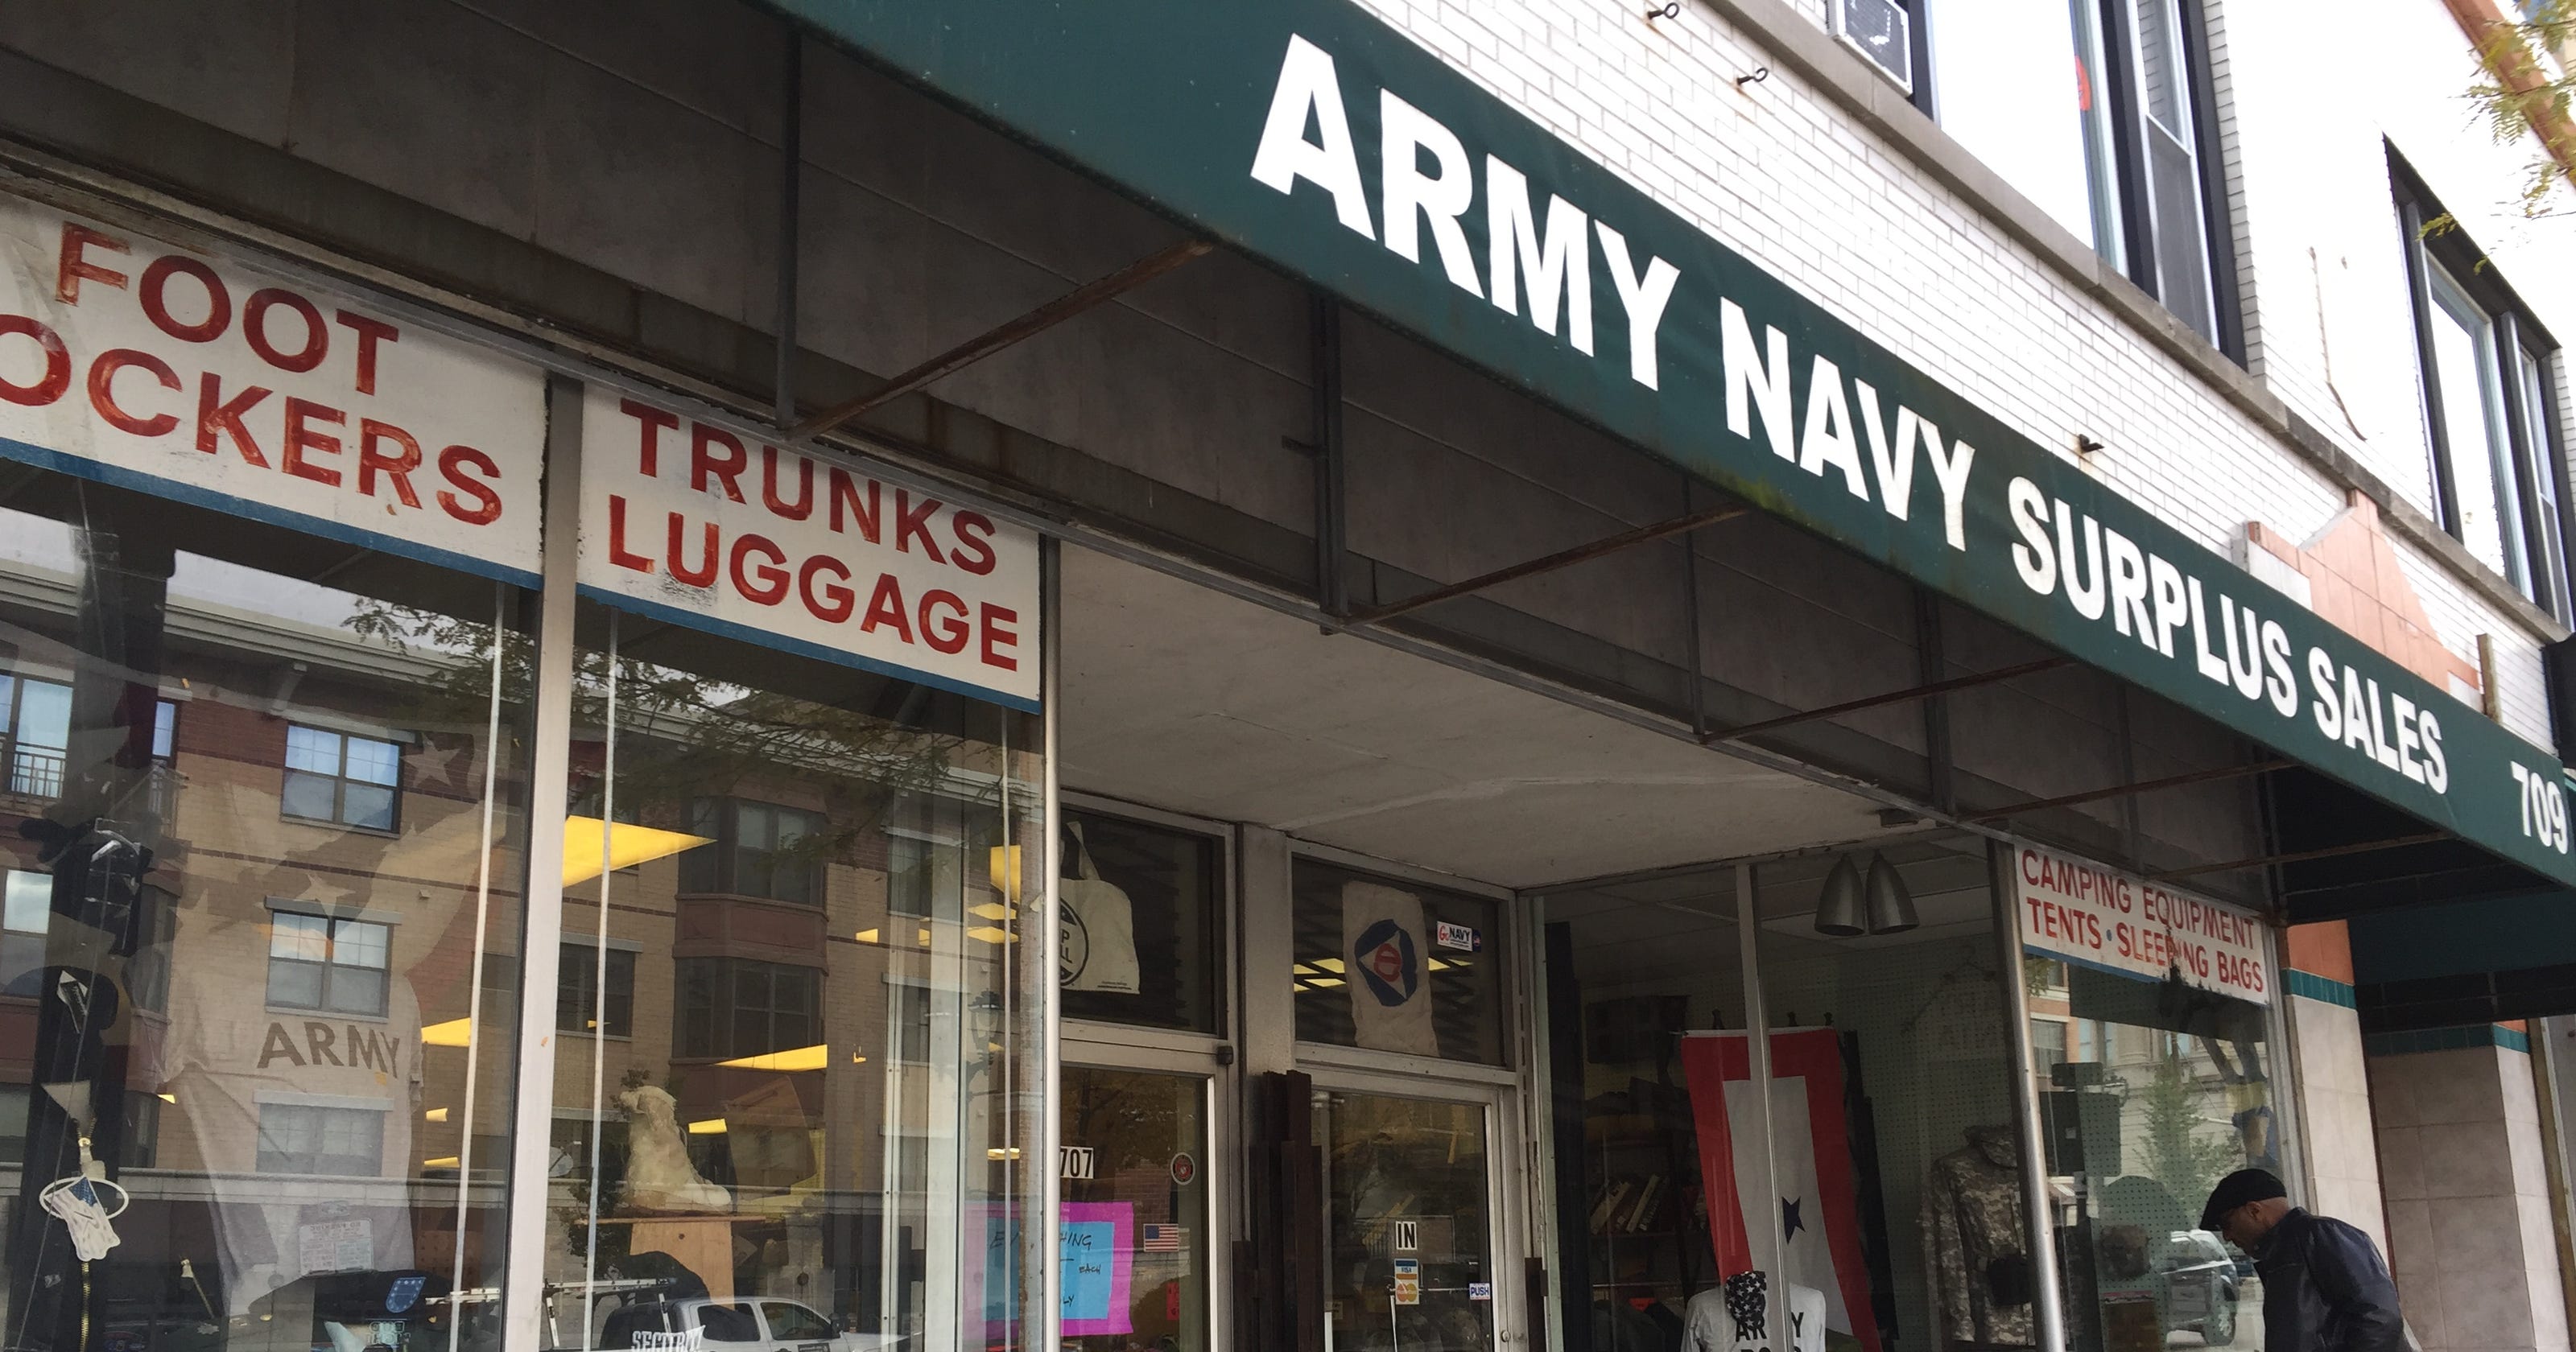 Army Navy Surplus store downtown will close